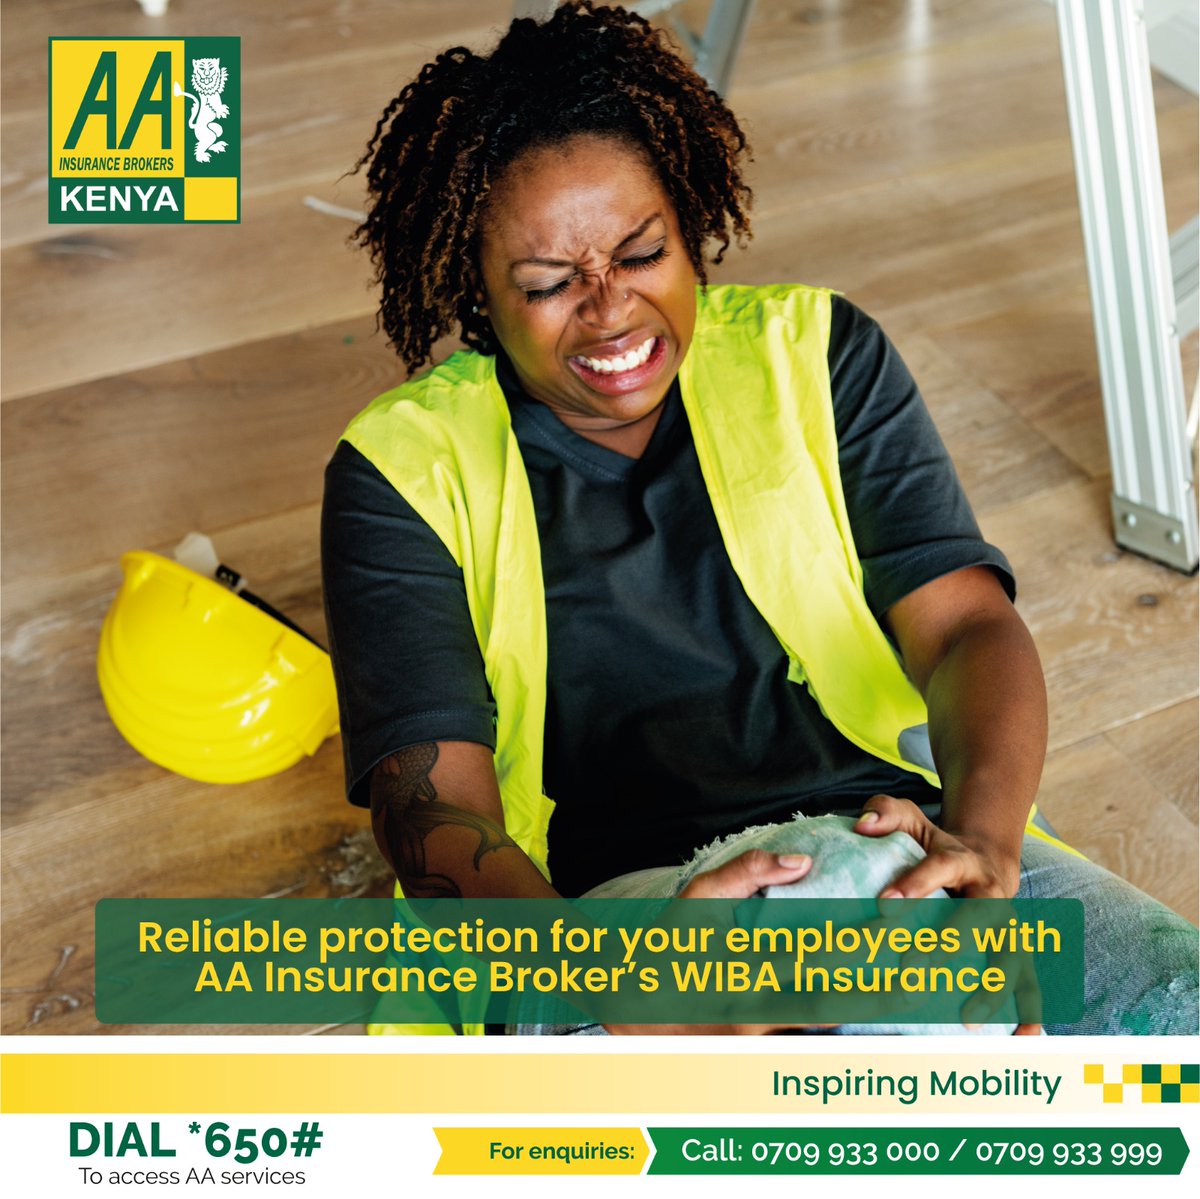 As an employer, do you have WIBA insurance? The main objective of WIBA insurance cover is to provide compensation to employees for work-related injuries and diseases contracted in the course of employment. Request a free quote, call us on 0720940636 
#AAIBCares